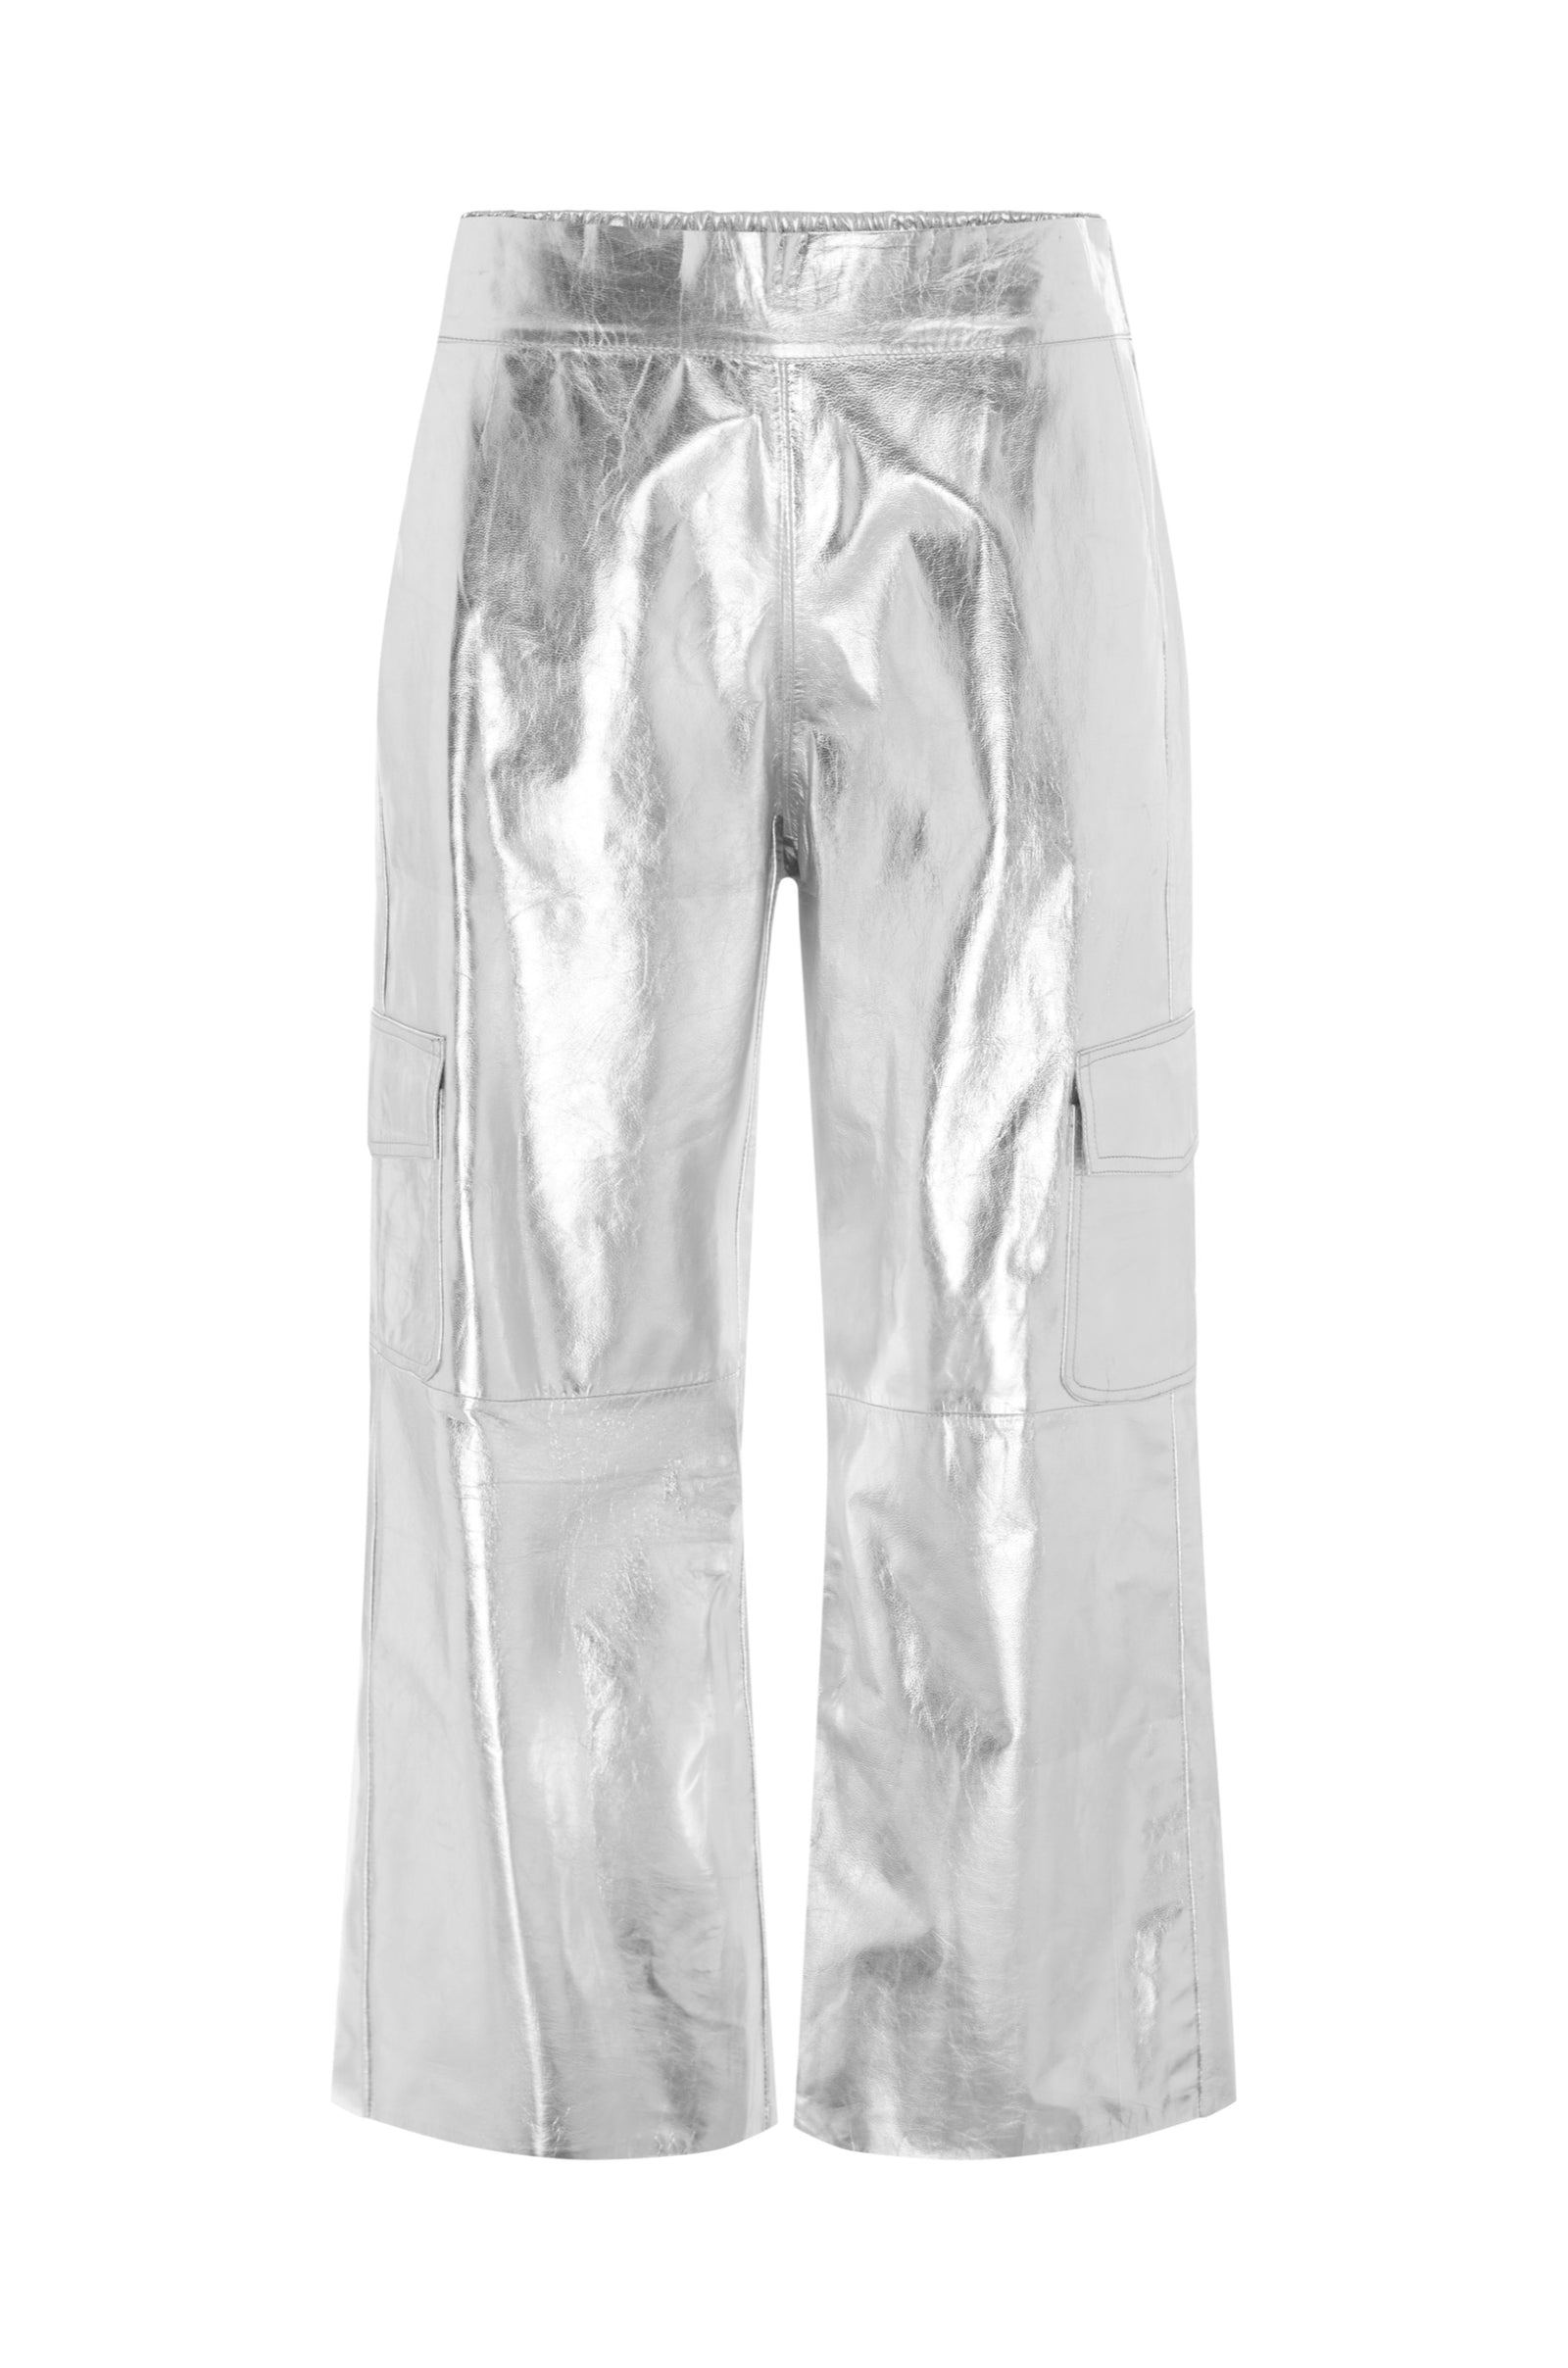 styling silver asymmetrical ruched space pants｜TikTok Search